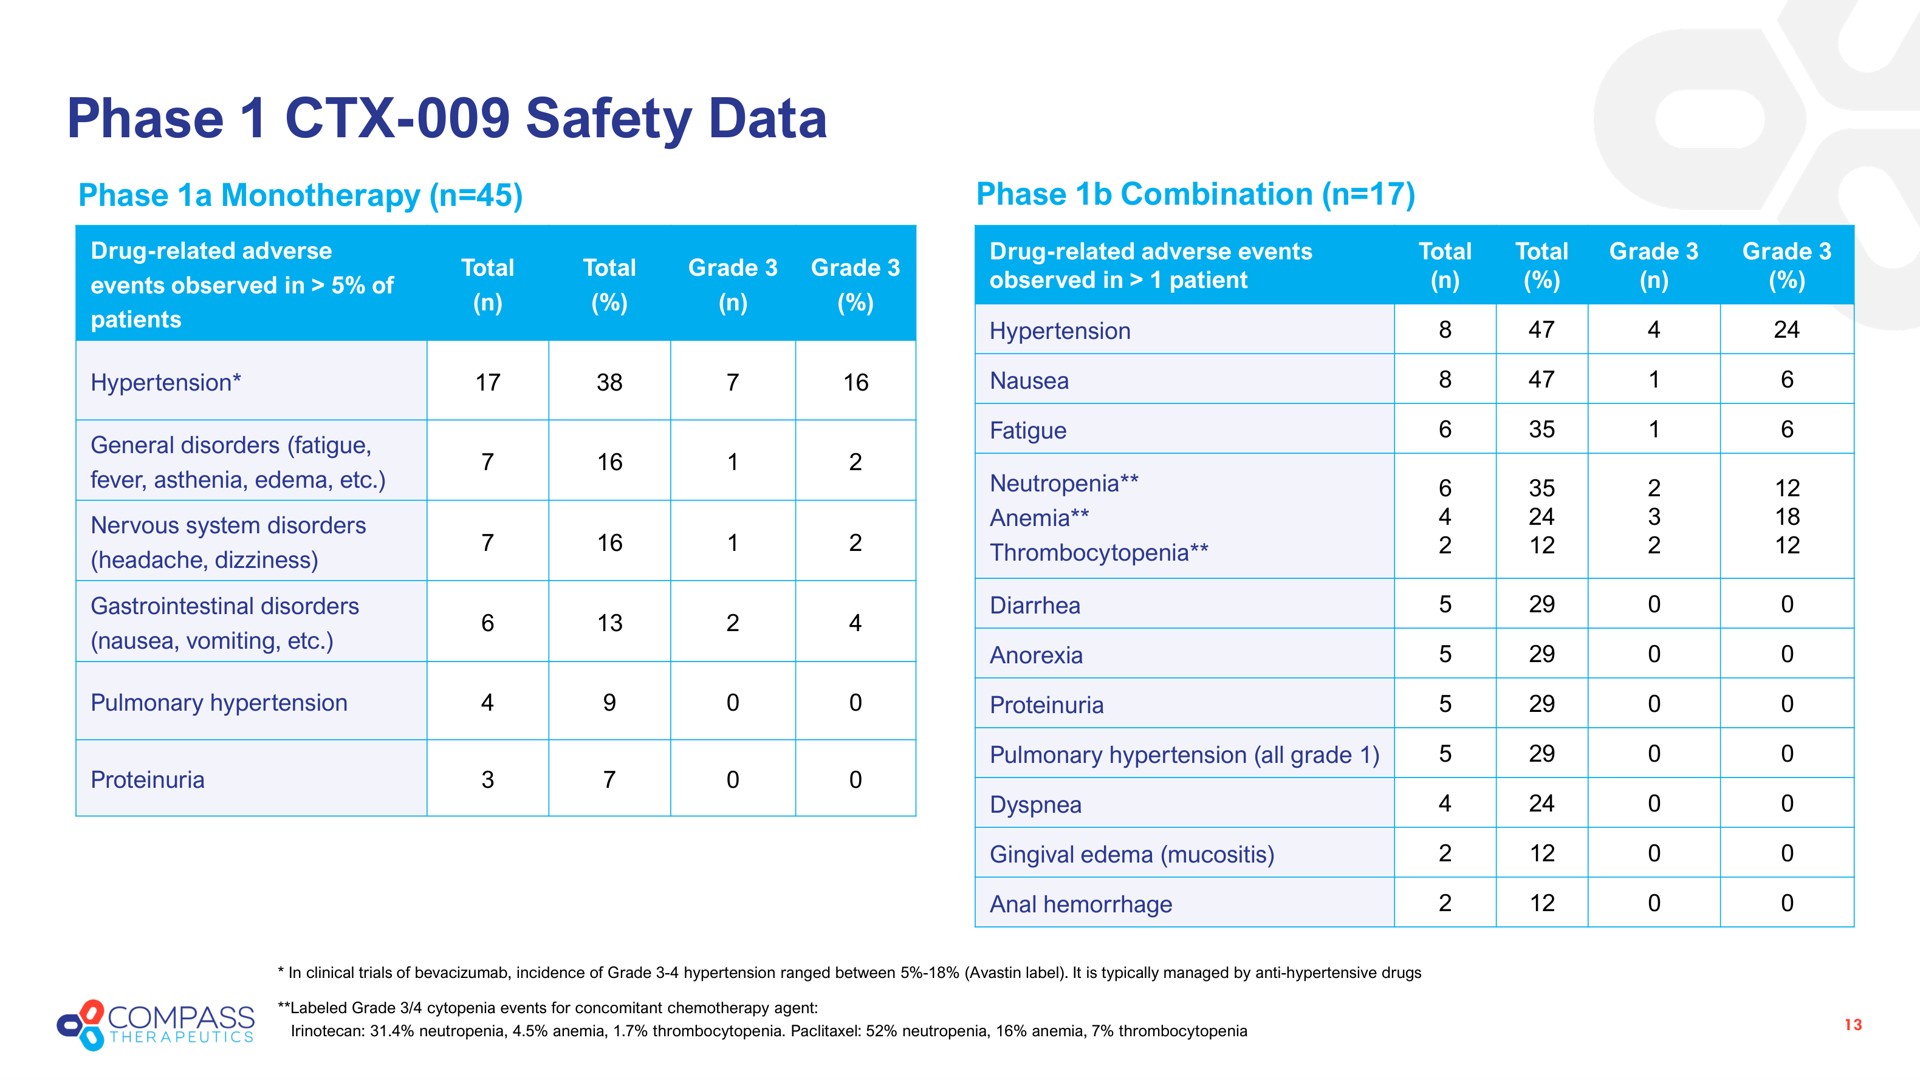 phase safety data hei as observed in patient | Compass Therapeutics